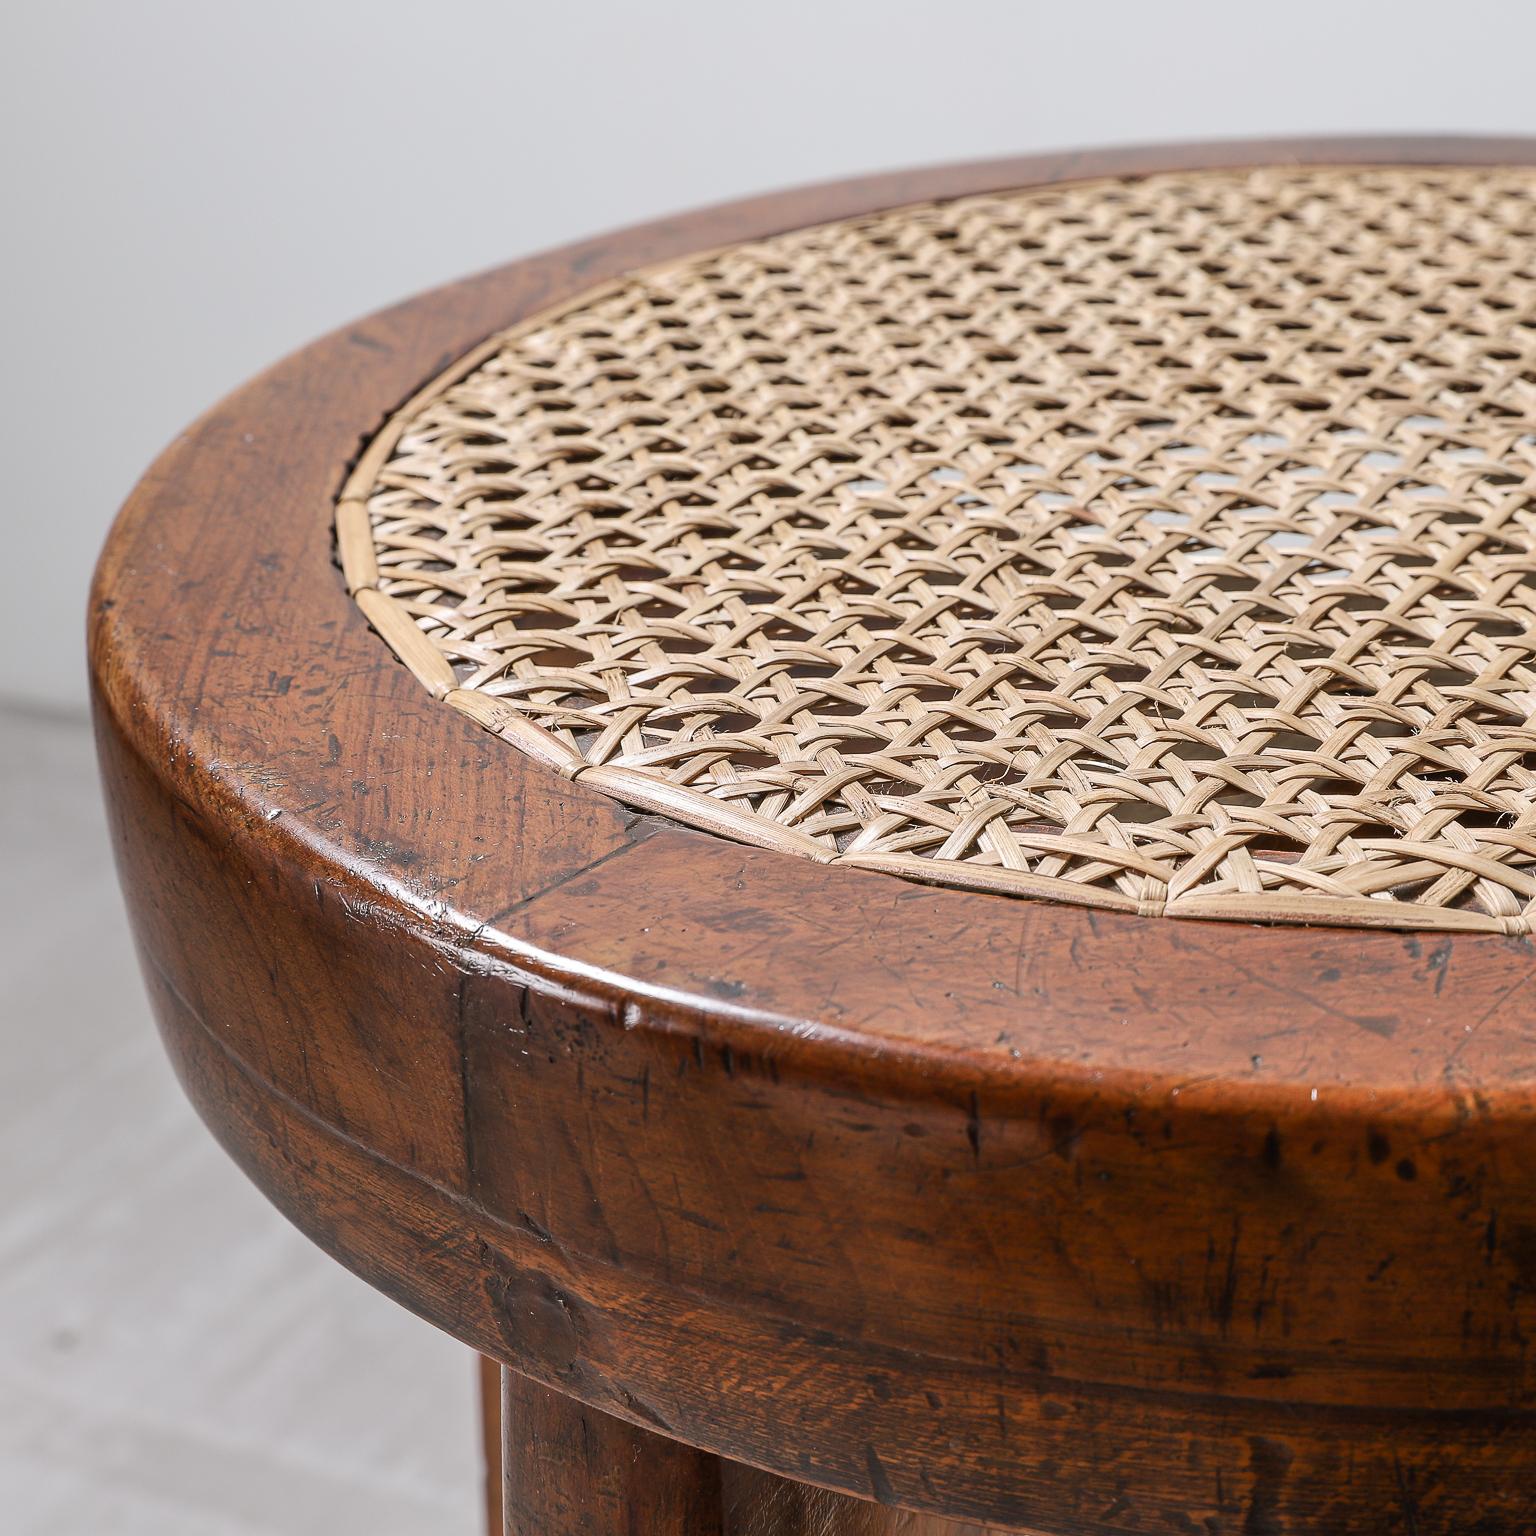 pierre jeanneret caned stool